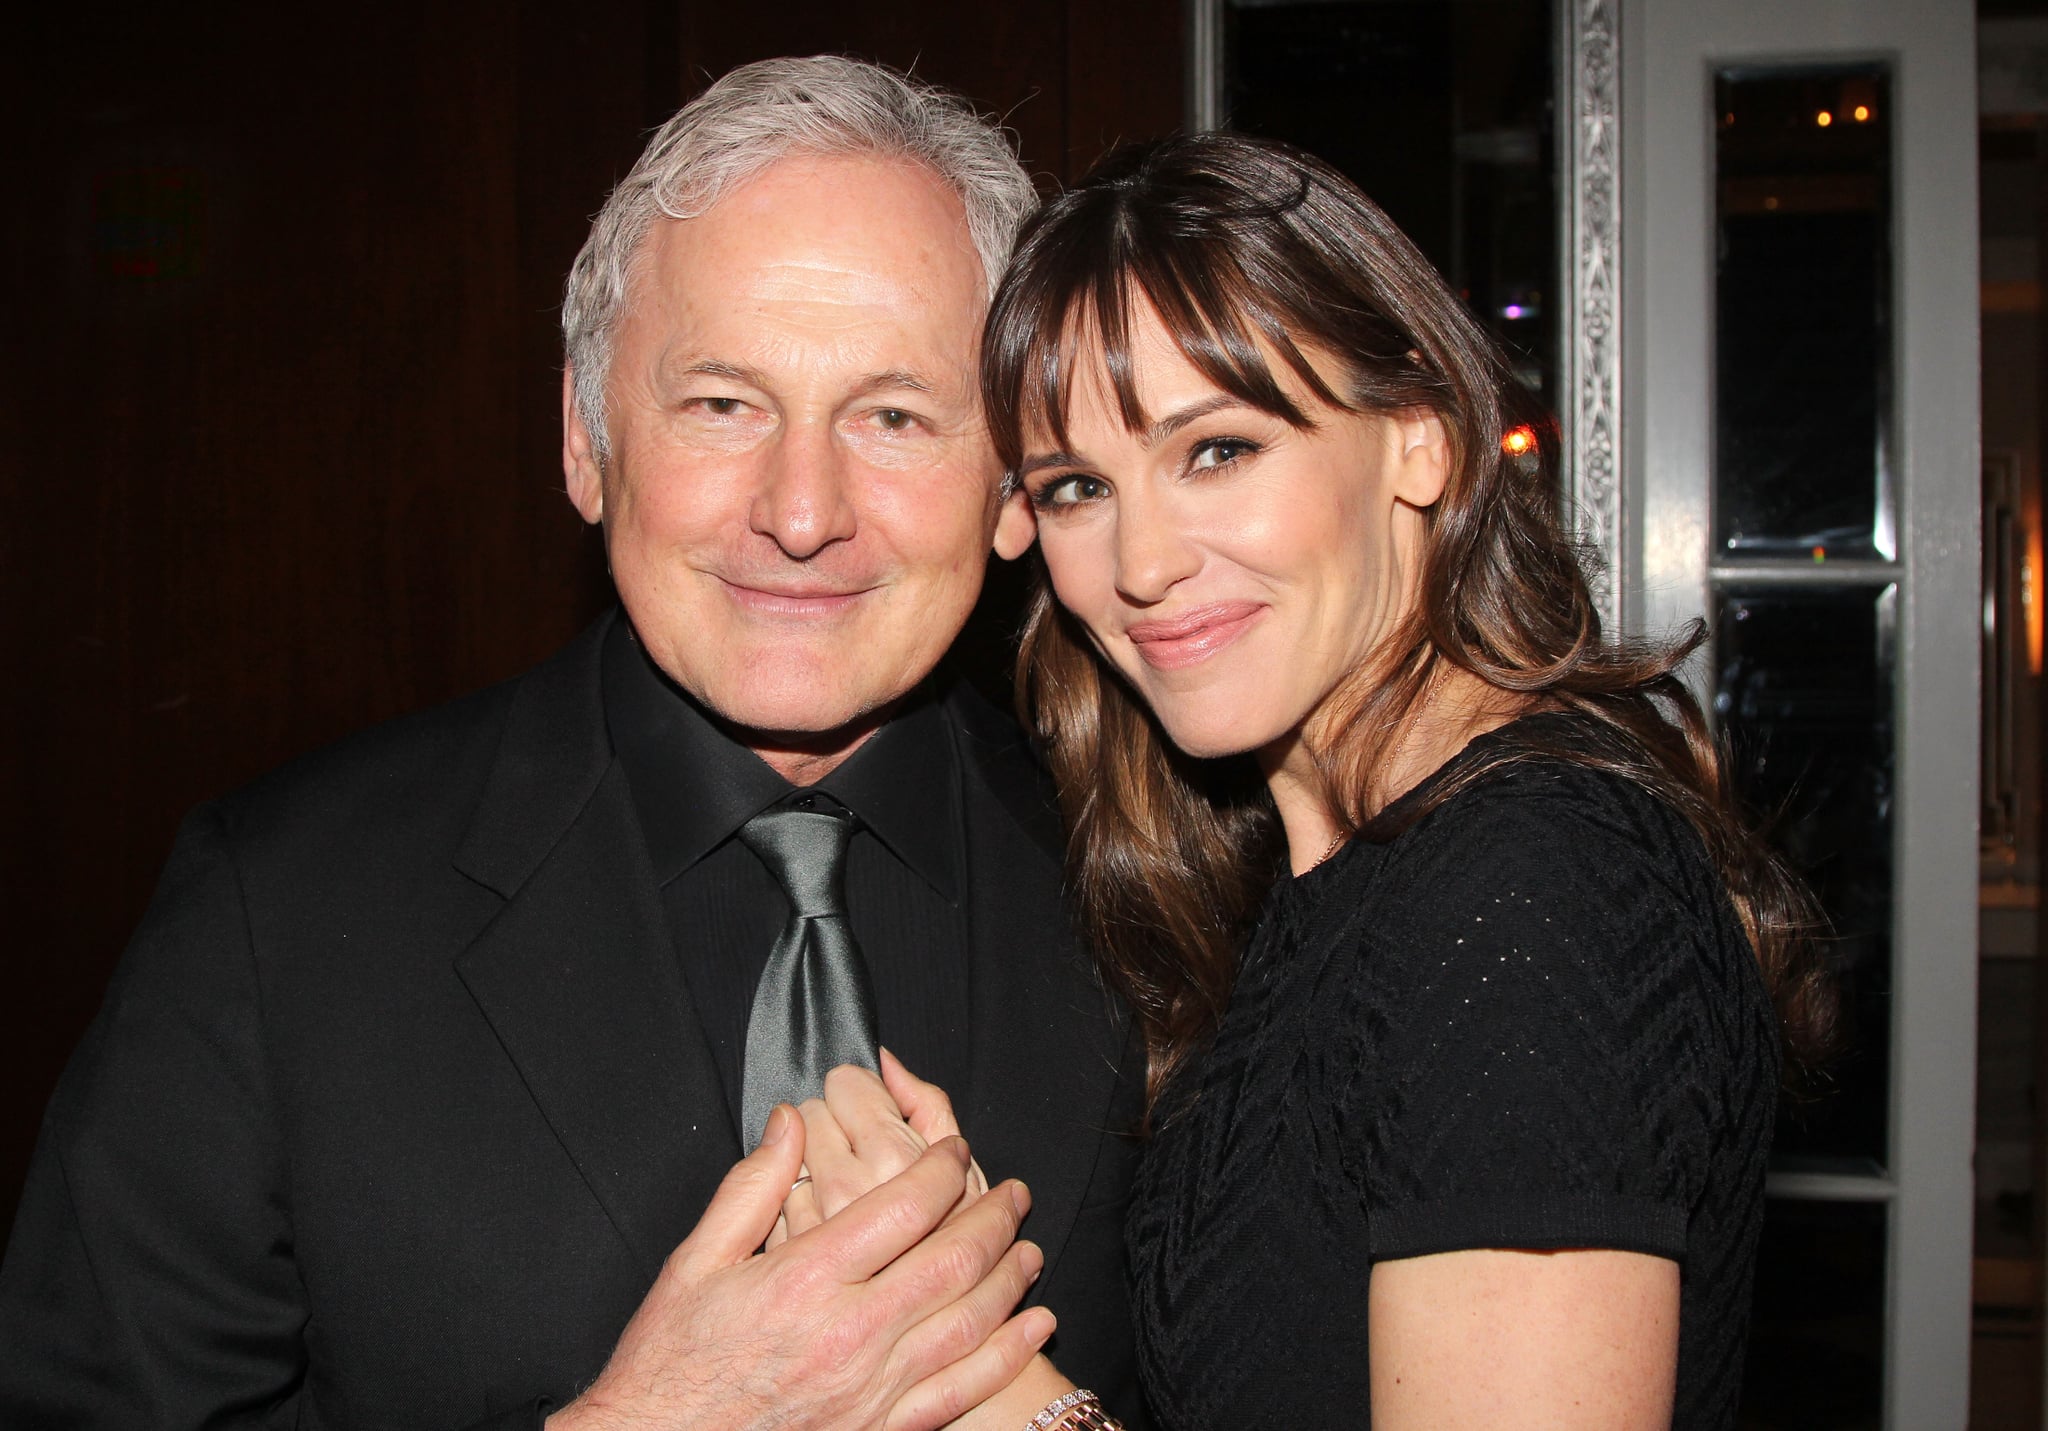 NEW YORK, NY - MARCH 02:  (EXCLUSIVE COVERAGE) Victor Garber and Jennifer Garner (who co-starred on the television show 